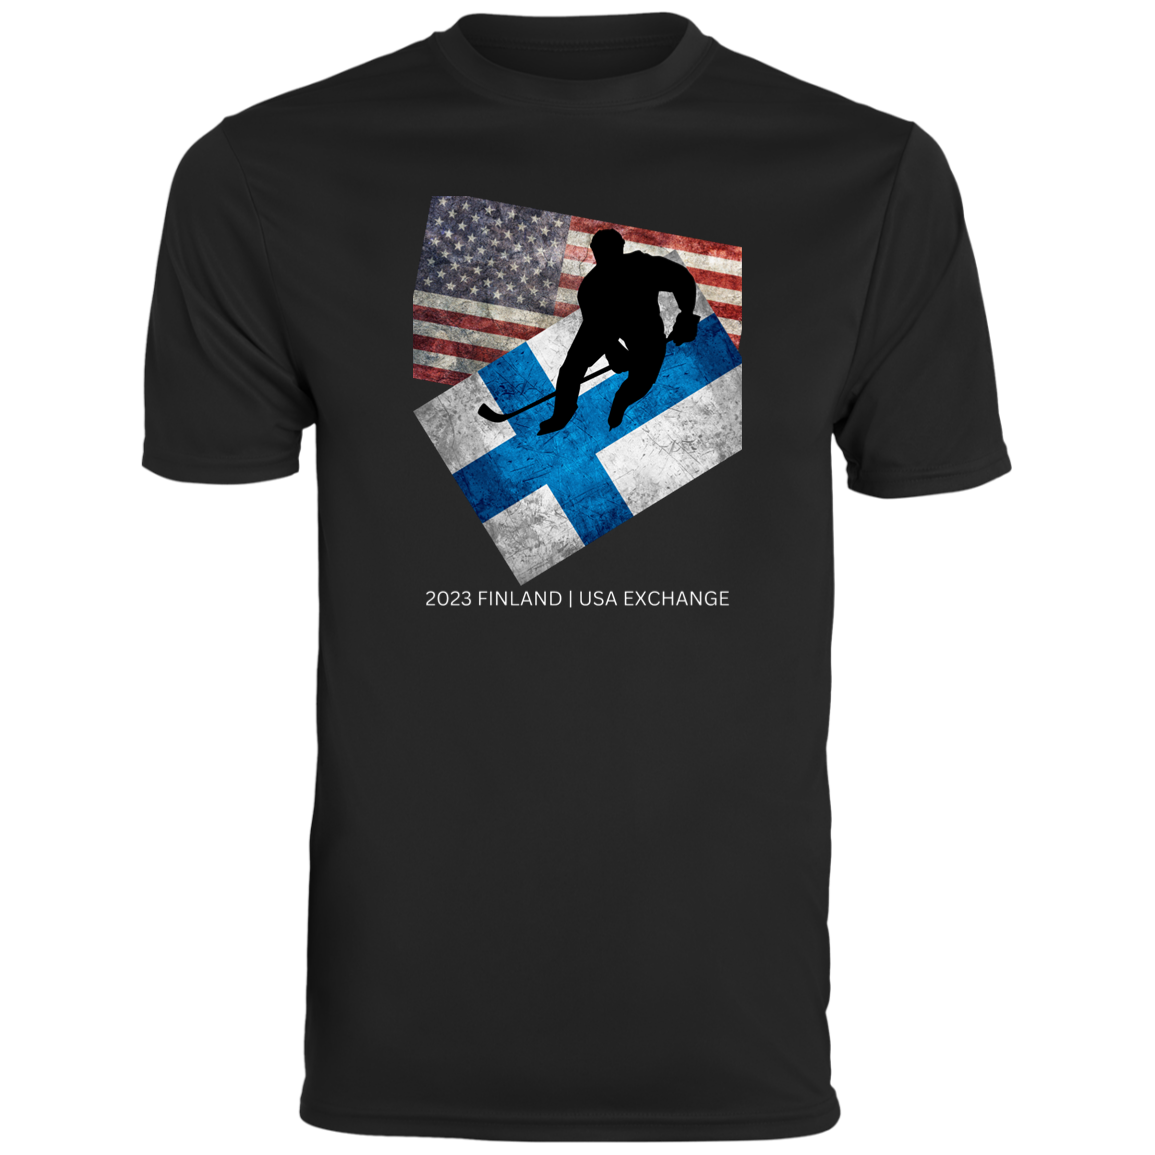 Exchange Flags Youth Moisture-Wicking Tee